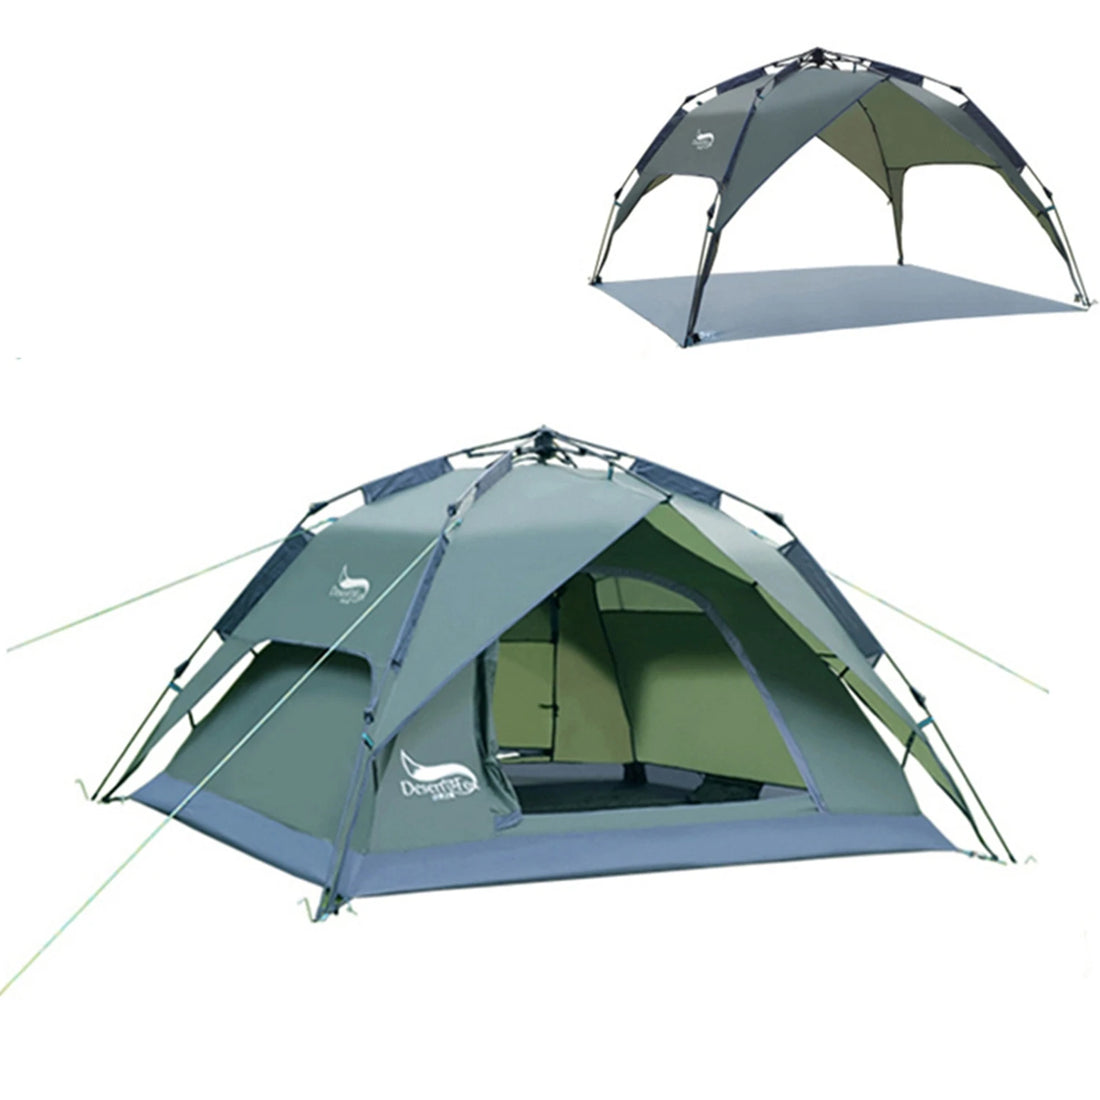 Desert Fox Family Camping Tent 3 Person Outdoor Automatic Tents Instant Set-up Pop-up 2/3 Ways Use Tent for Beach Hiking Travel